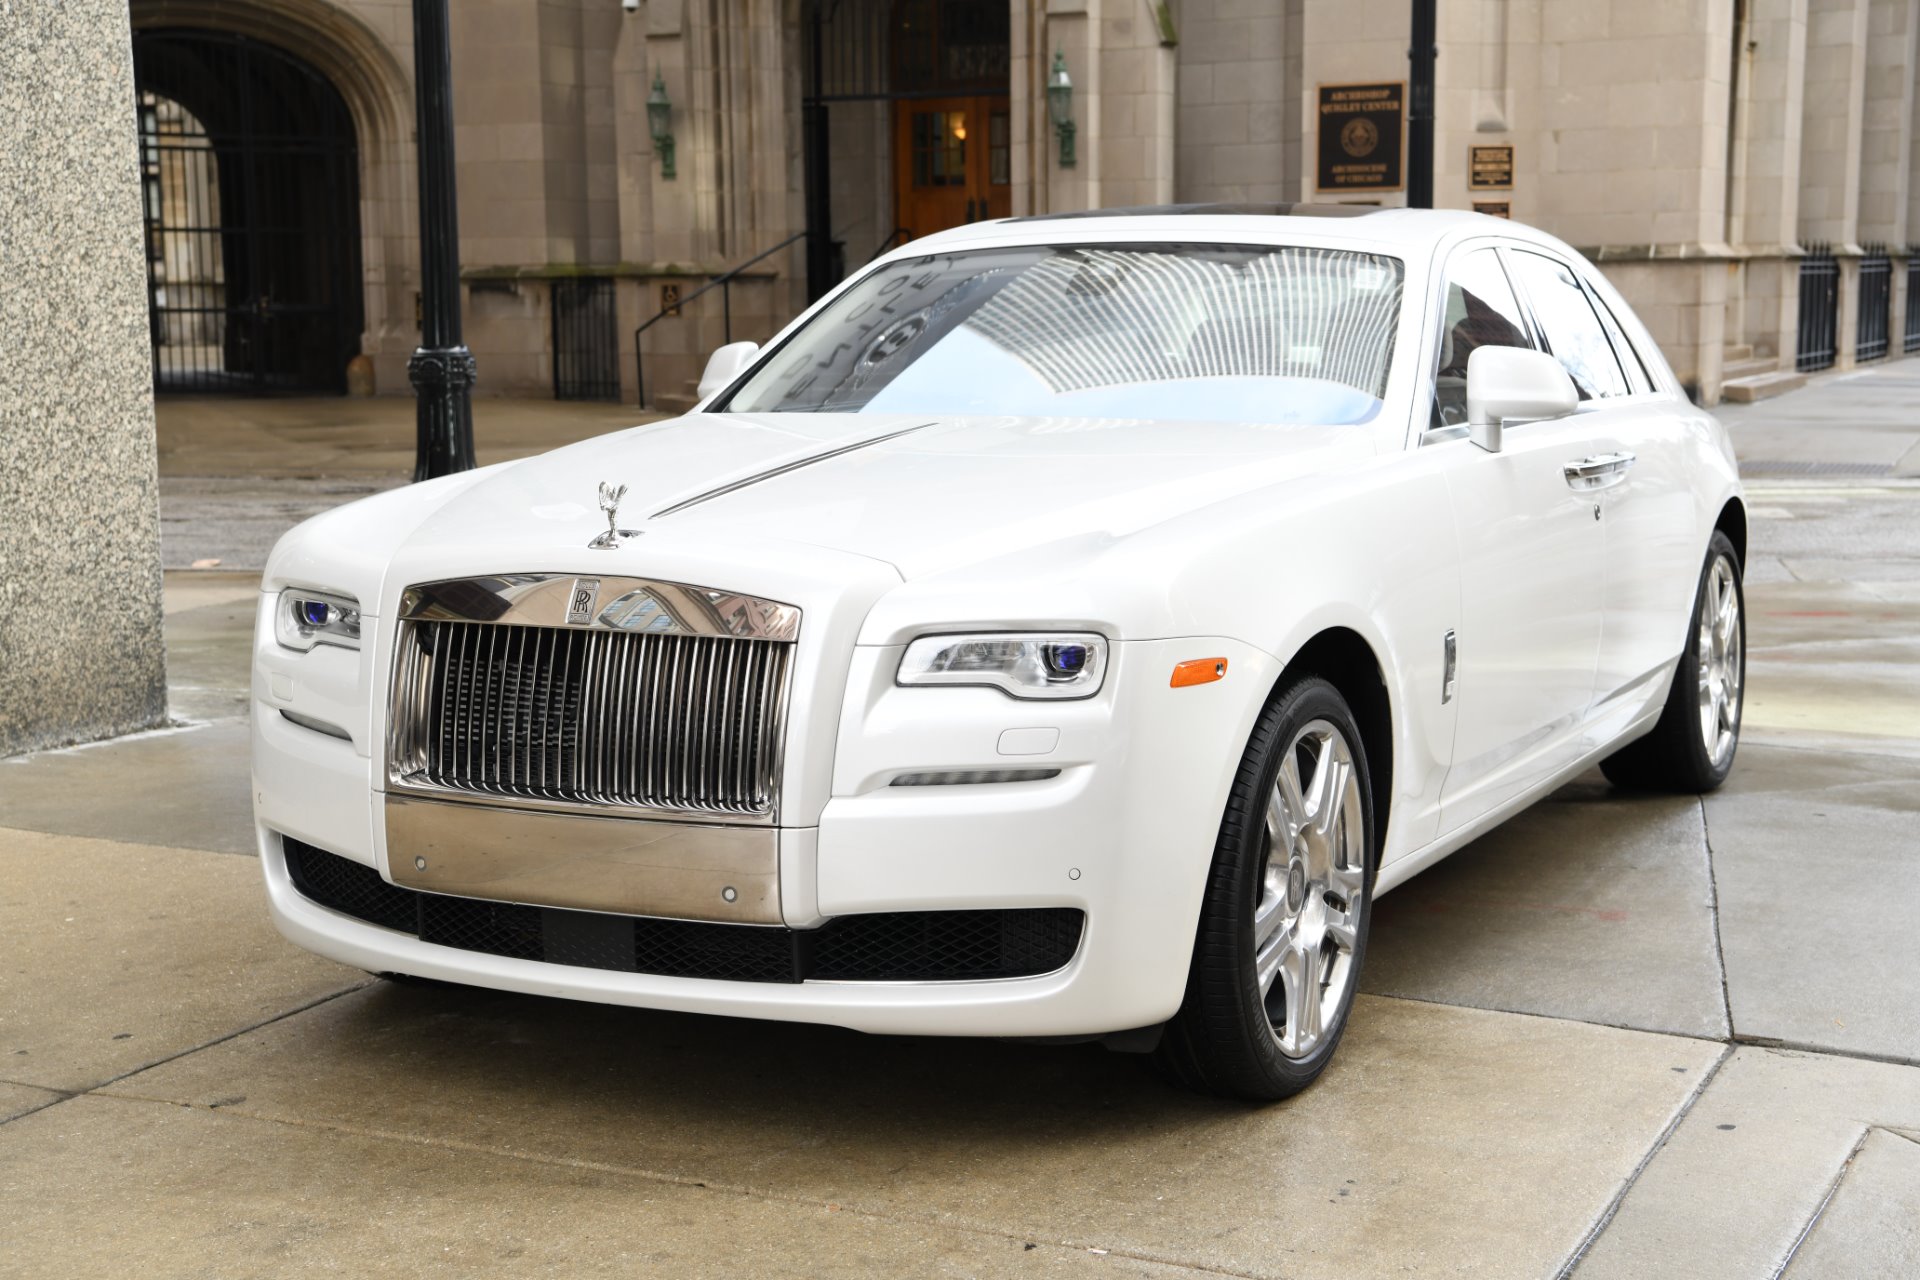 The 2021 Rolls-Royce Ghost: When 'Entry-Level' Costs $330,000